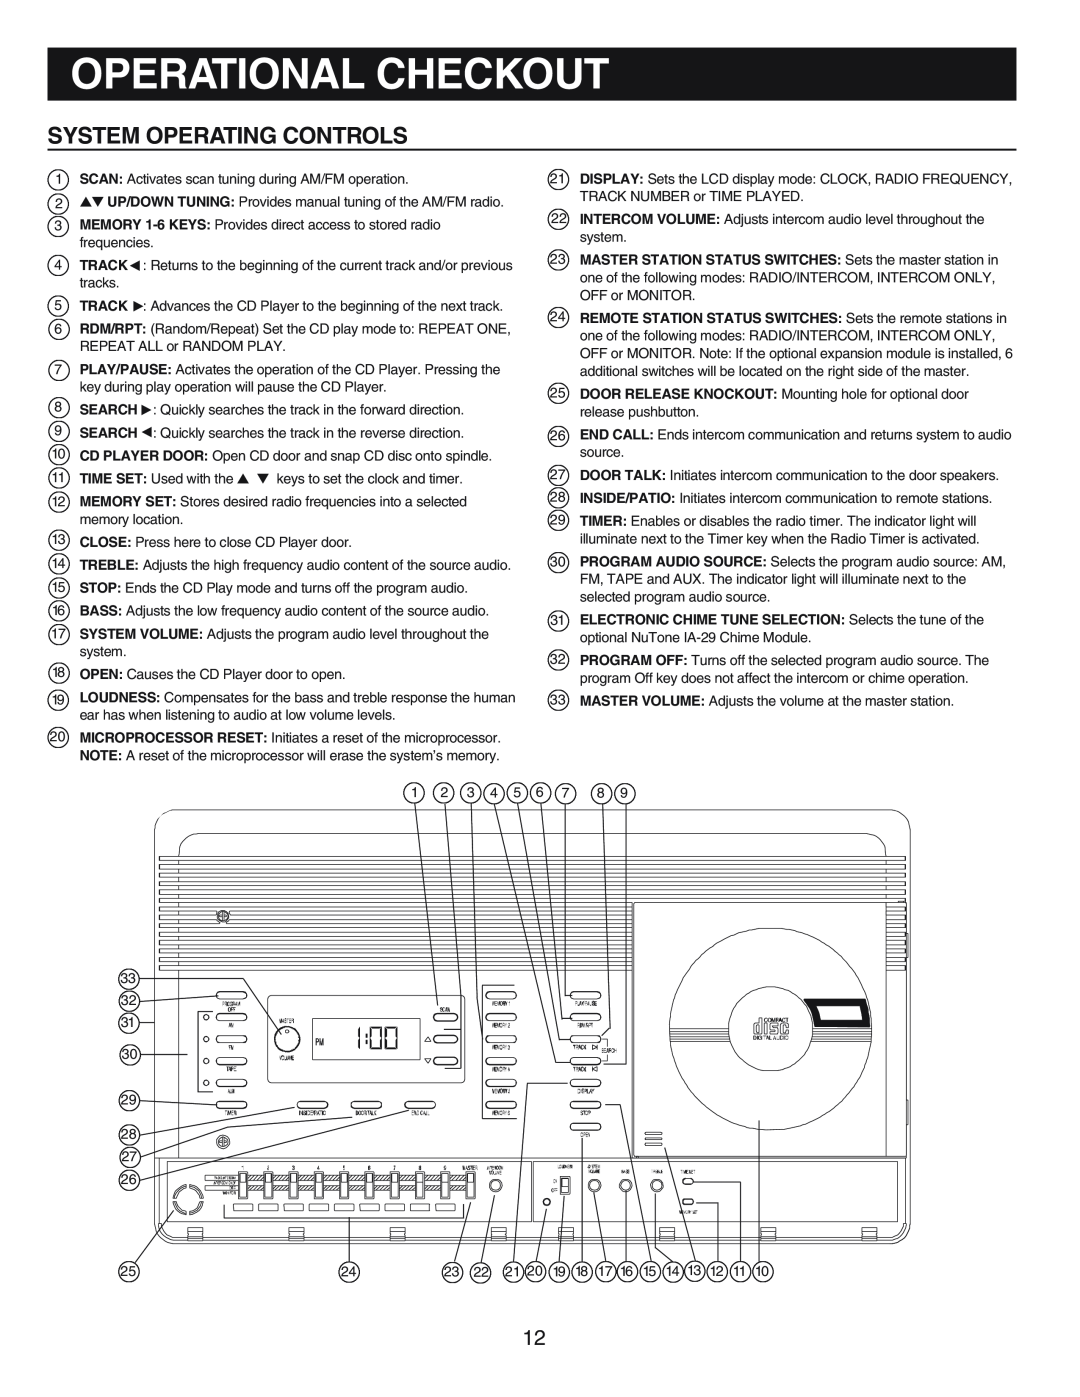 NuTone IM-440 Series installation instructions 4TRACK Returns to the beginning of the current track and/or previous tracks 